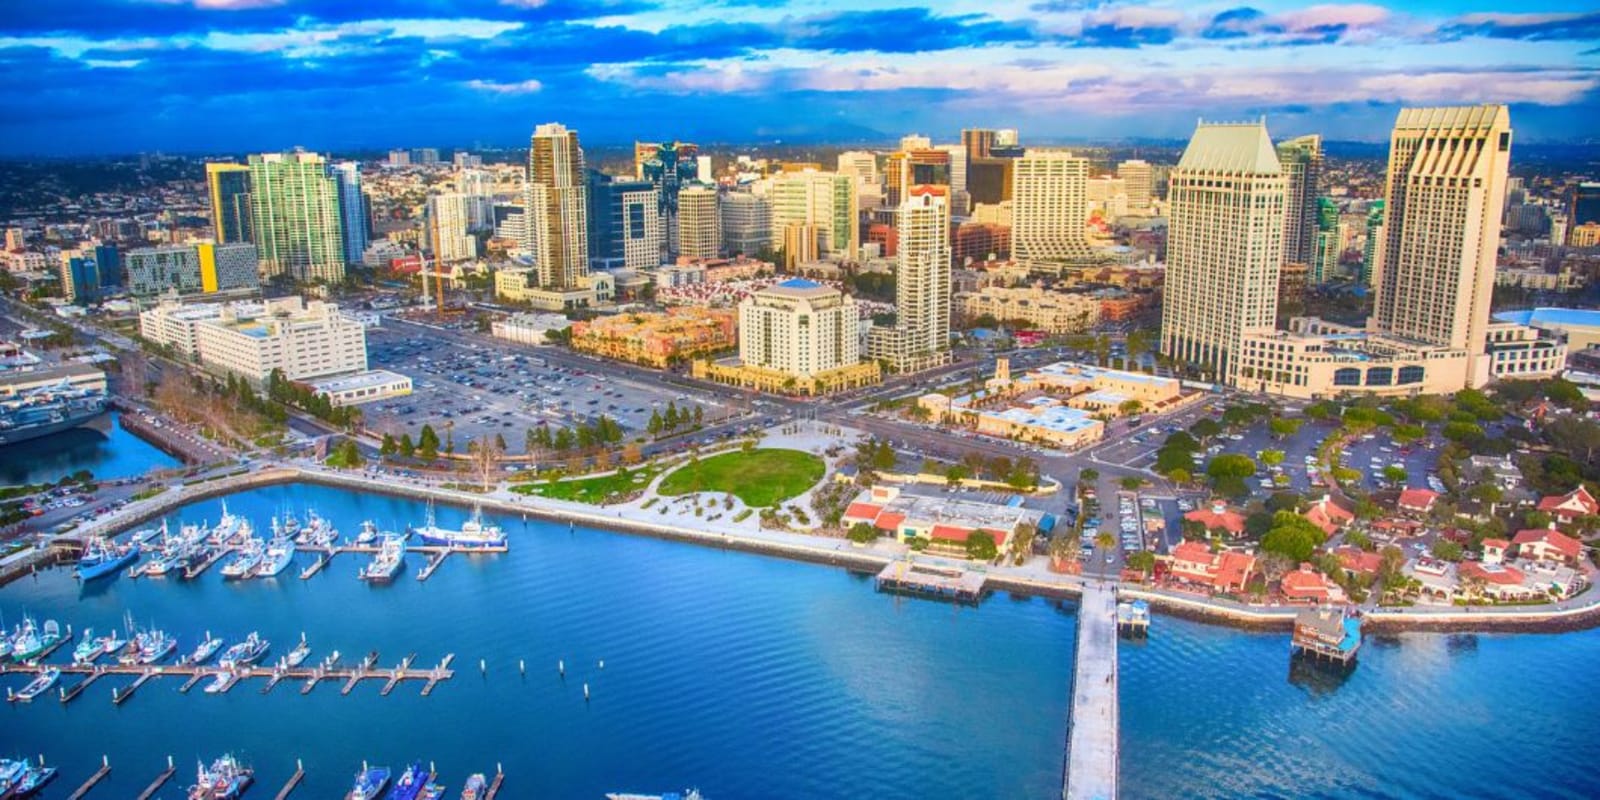 An aerial view of down town San Diego with a marina, tall buildings and blue water